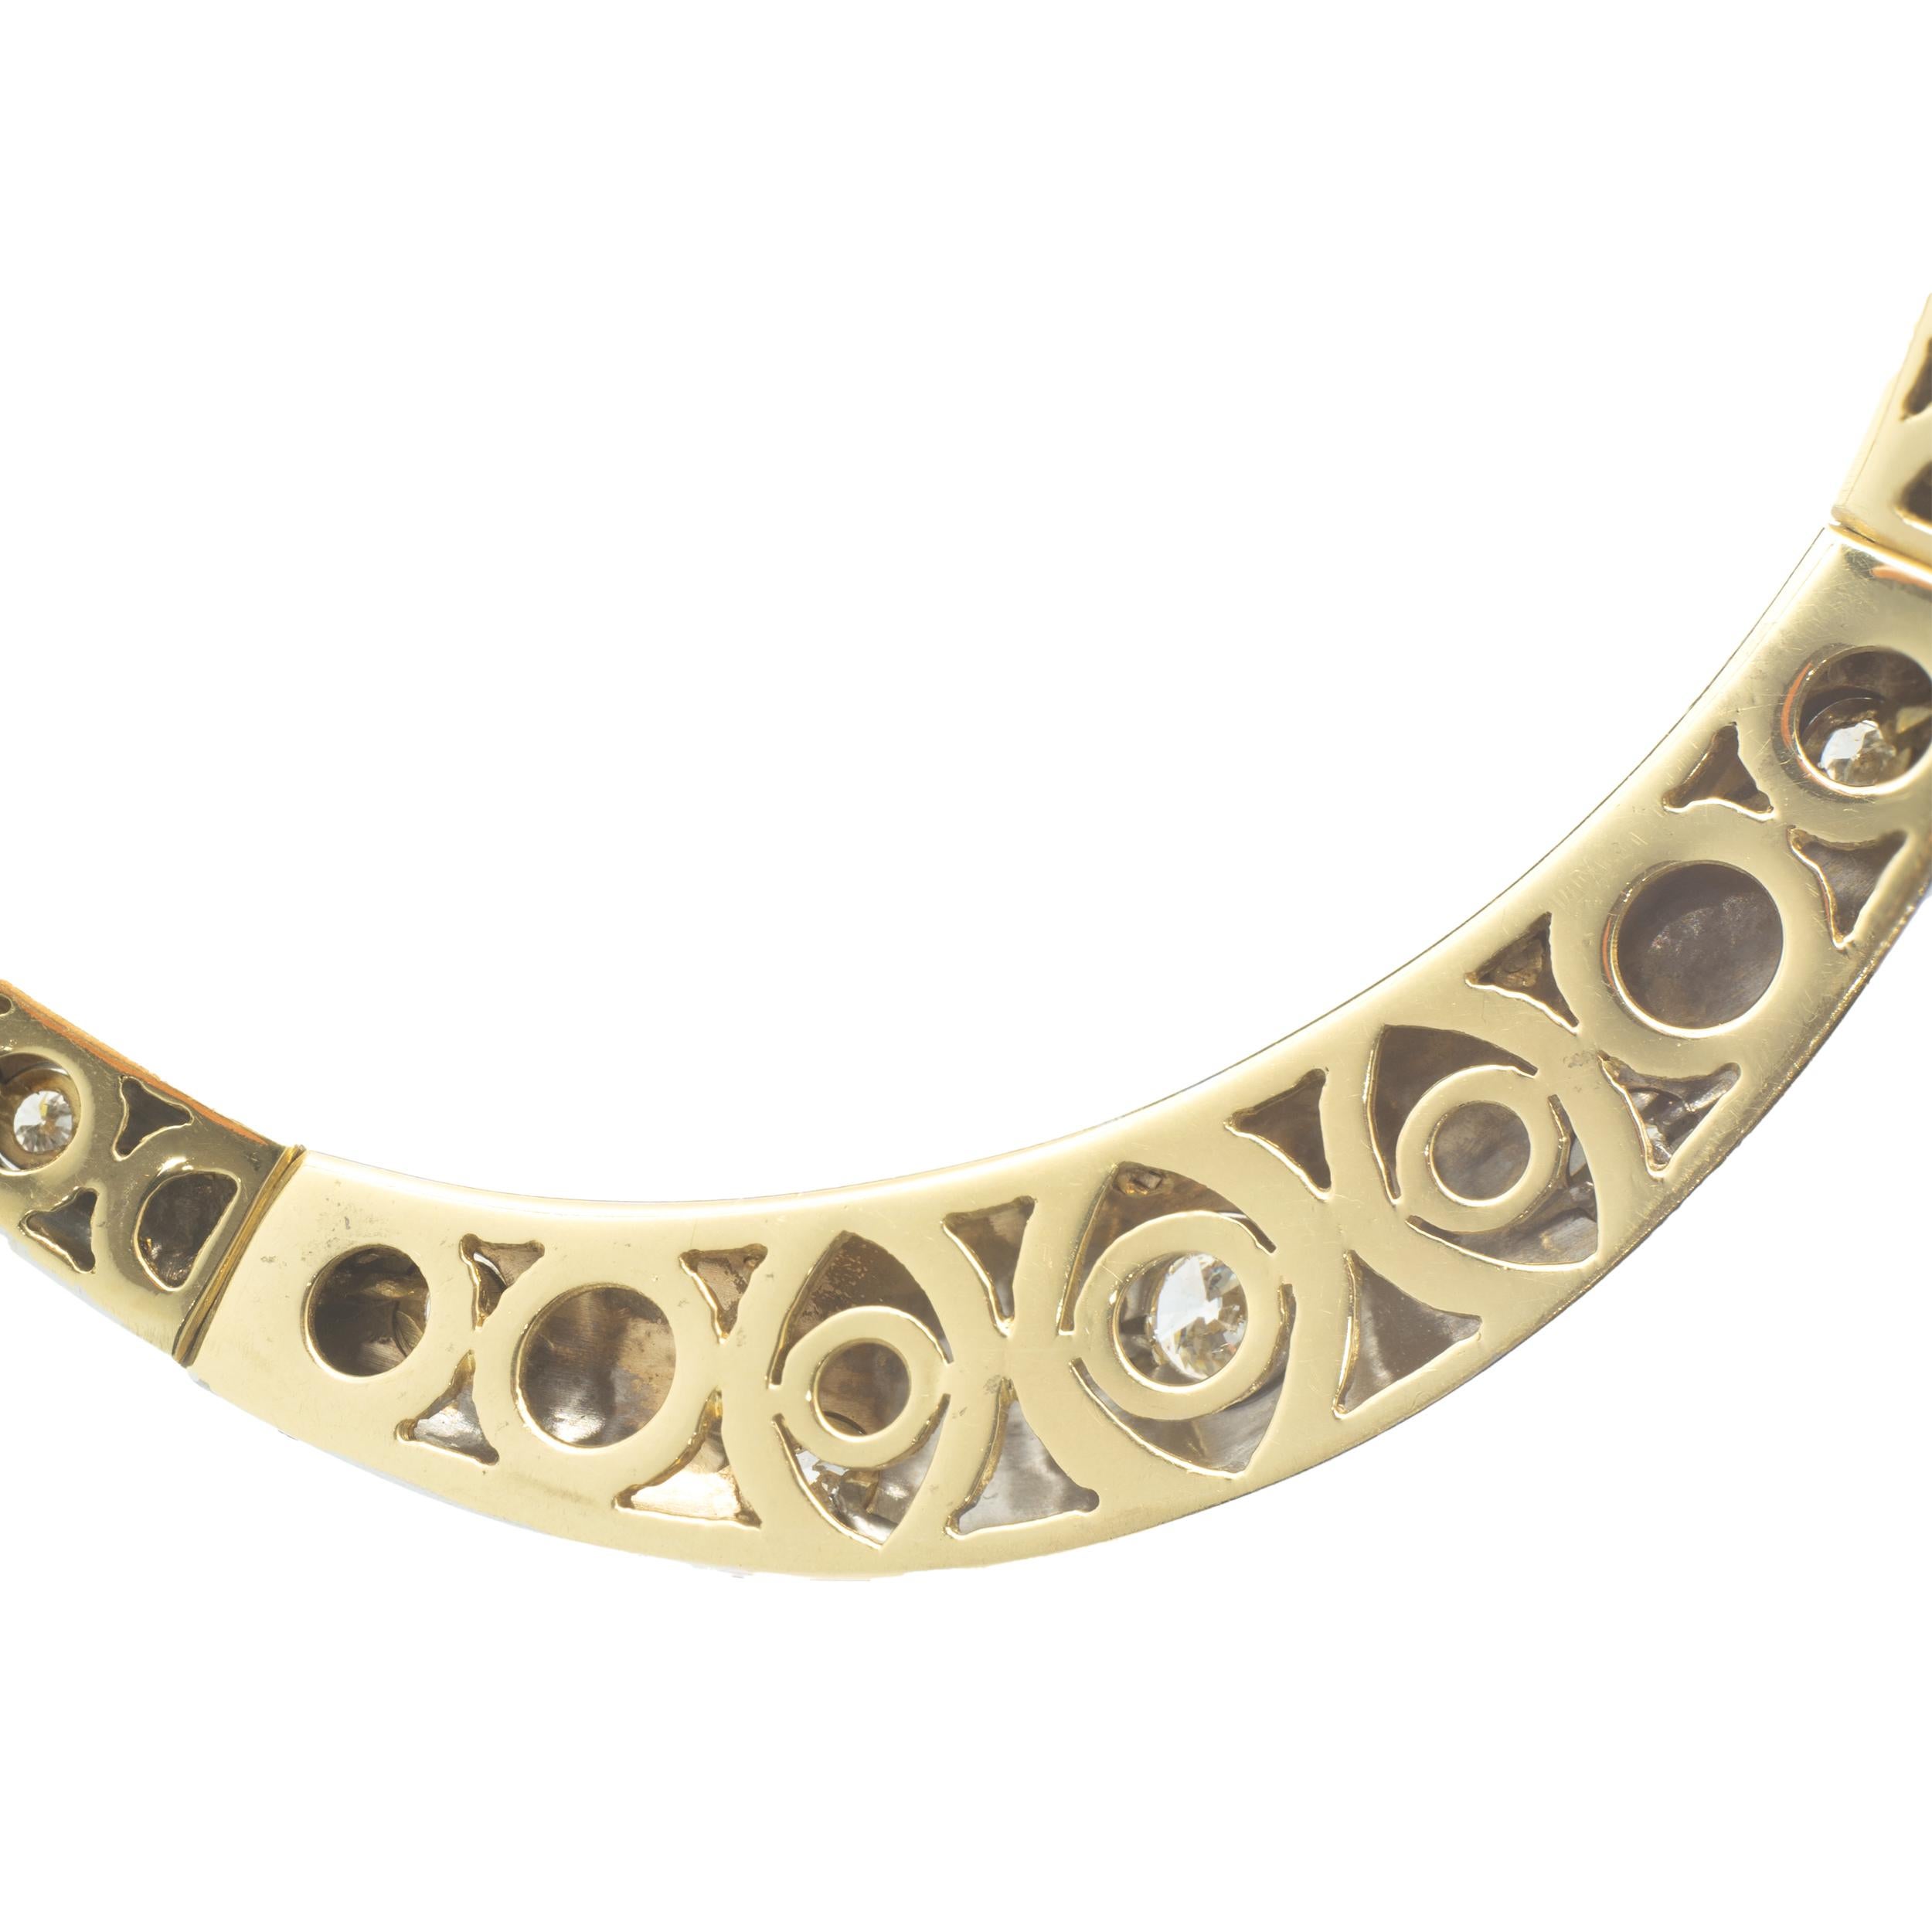 Designer: Sadies
Material: 18K yellow and white gold
Diamonds: 2.45cttw
Color: G
Clarity: VS
Dimensions: necklace measures 16-inches in length 
Weight: 94.28 grams
